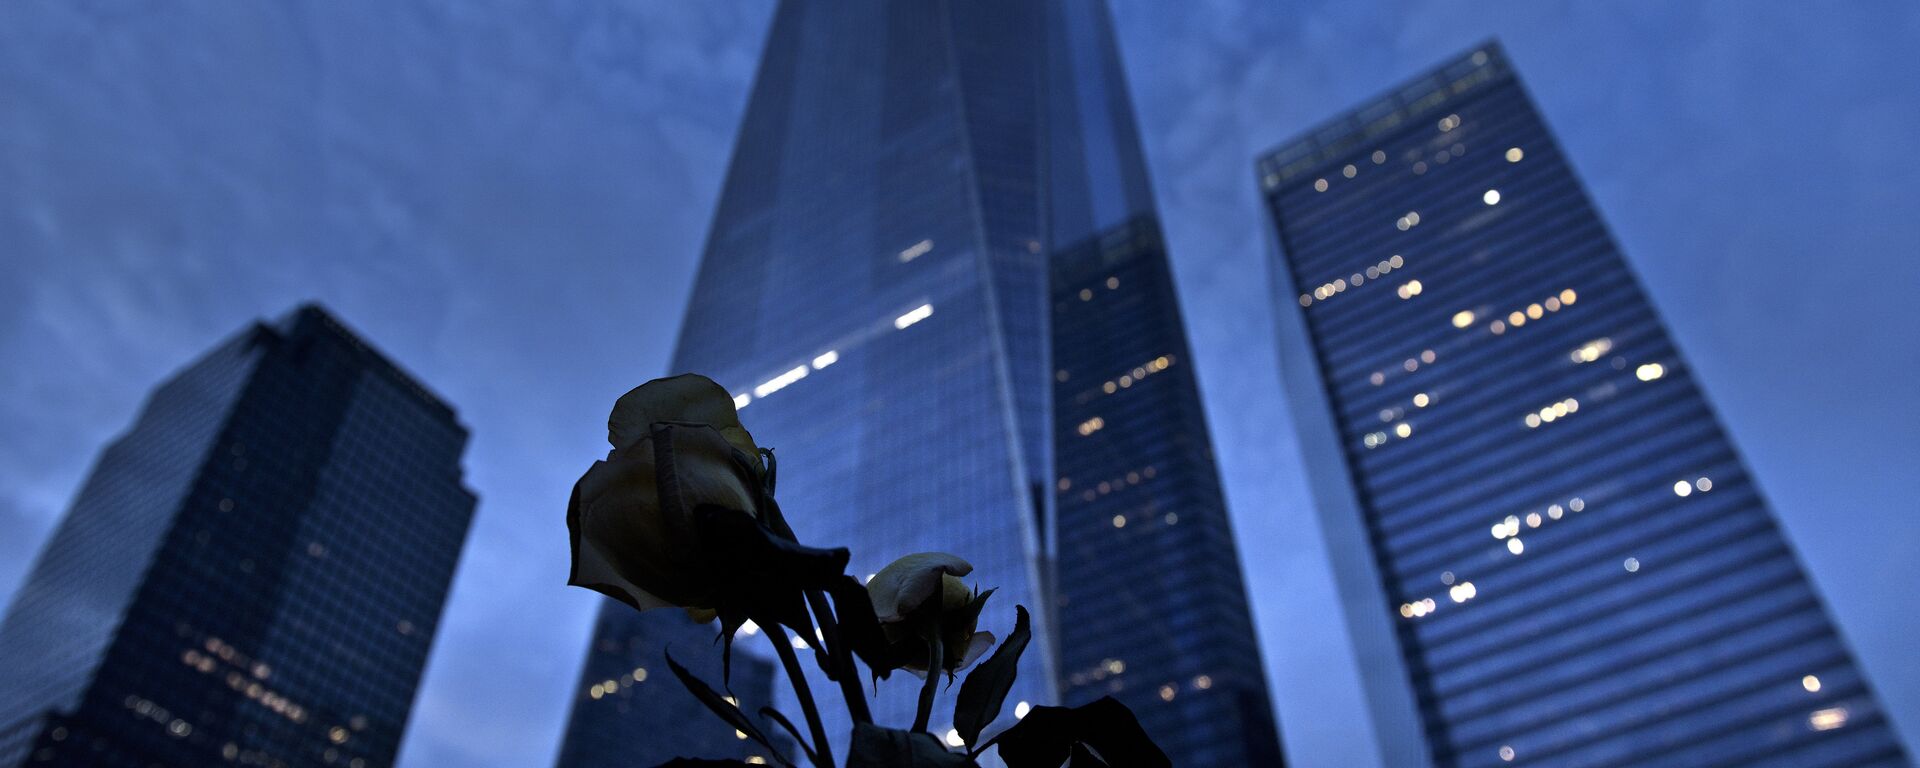 A view of One World Trade Center from the North Pool, which marks the former site of the North Tower of the World Trade Center, at Ground Zero the night before the 15th anniversary of the September 11, 2001 terrorist attacks in the United States in New York - Sputnik International, 1920, 07.09.2021